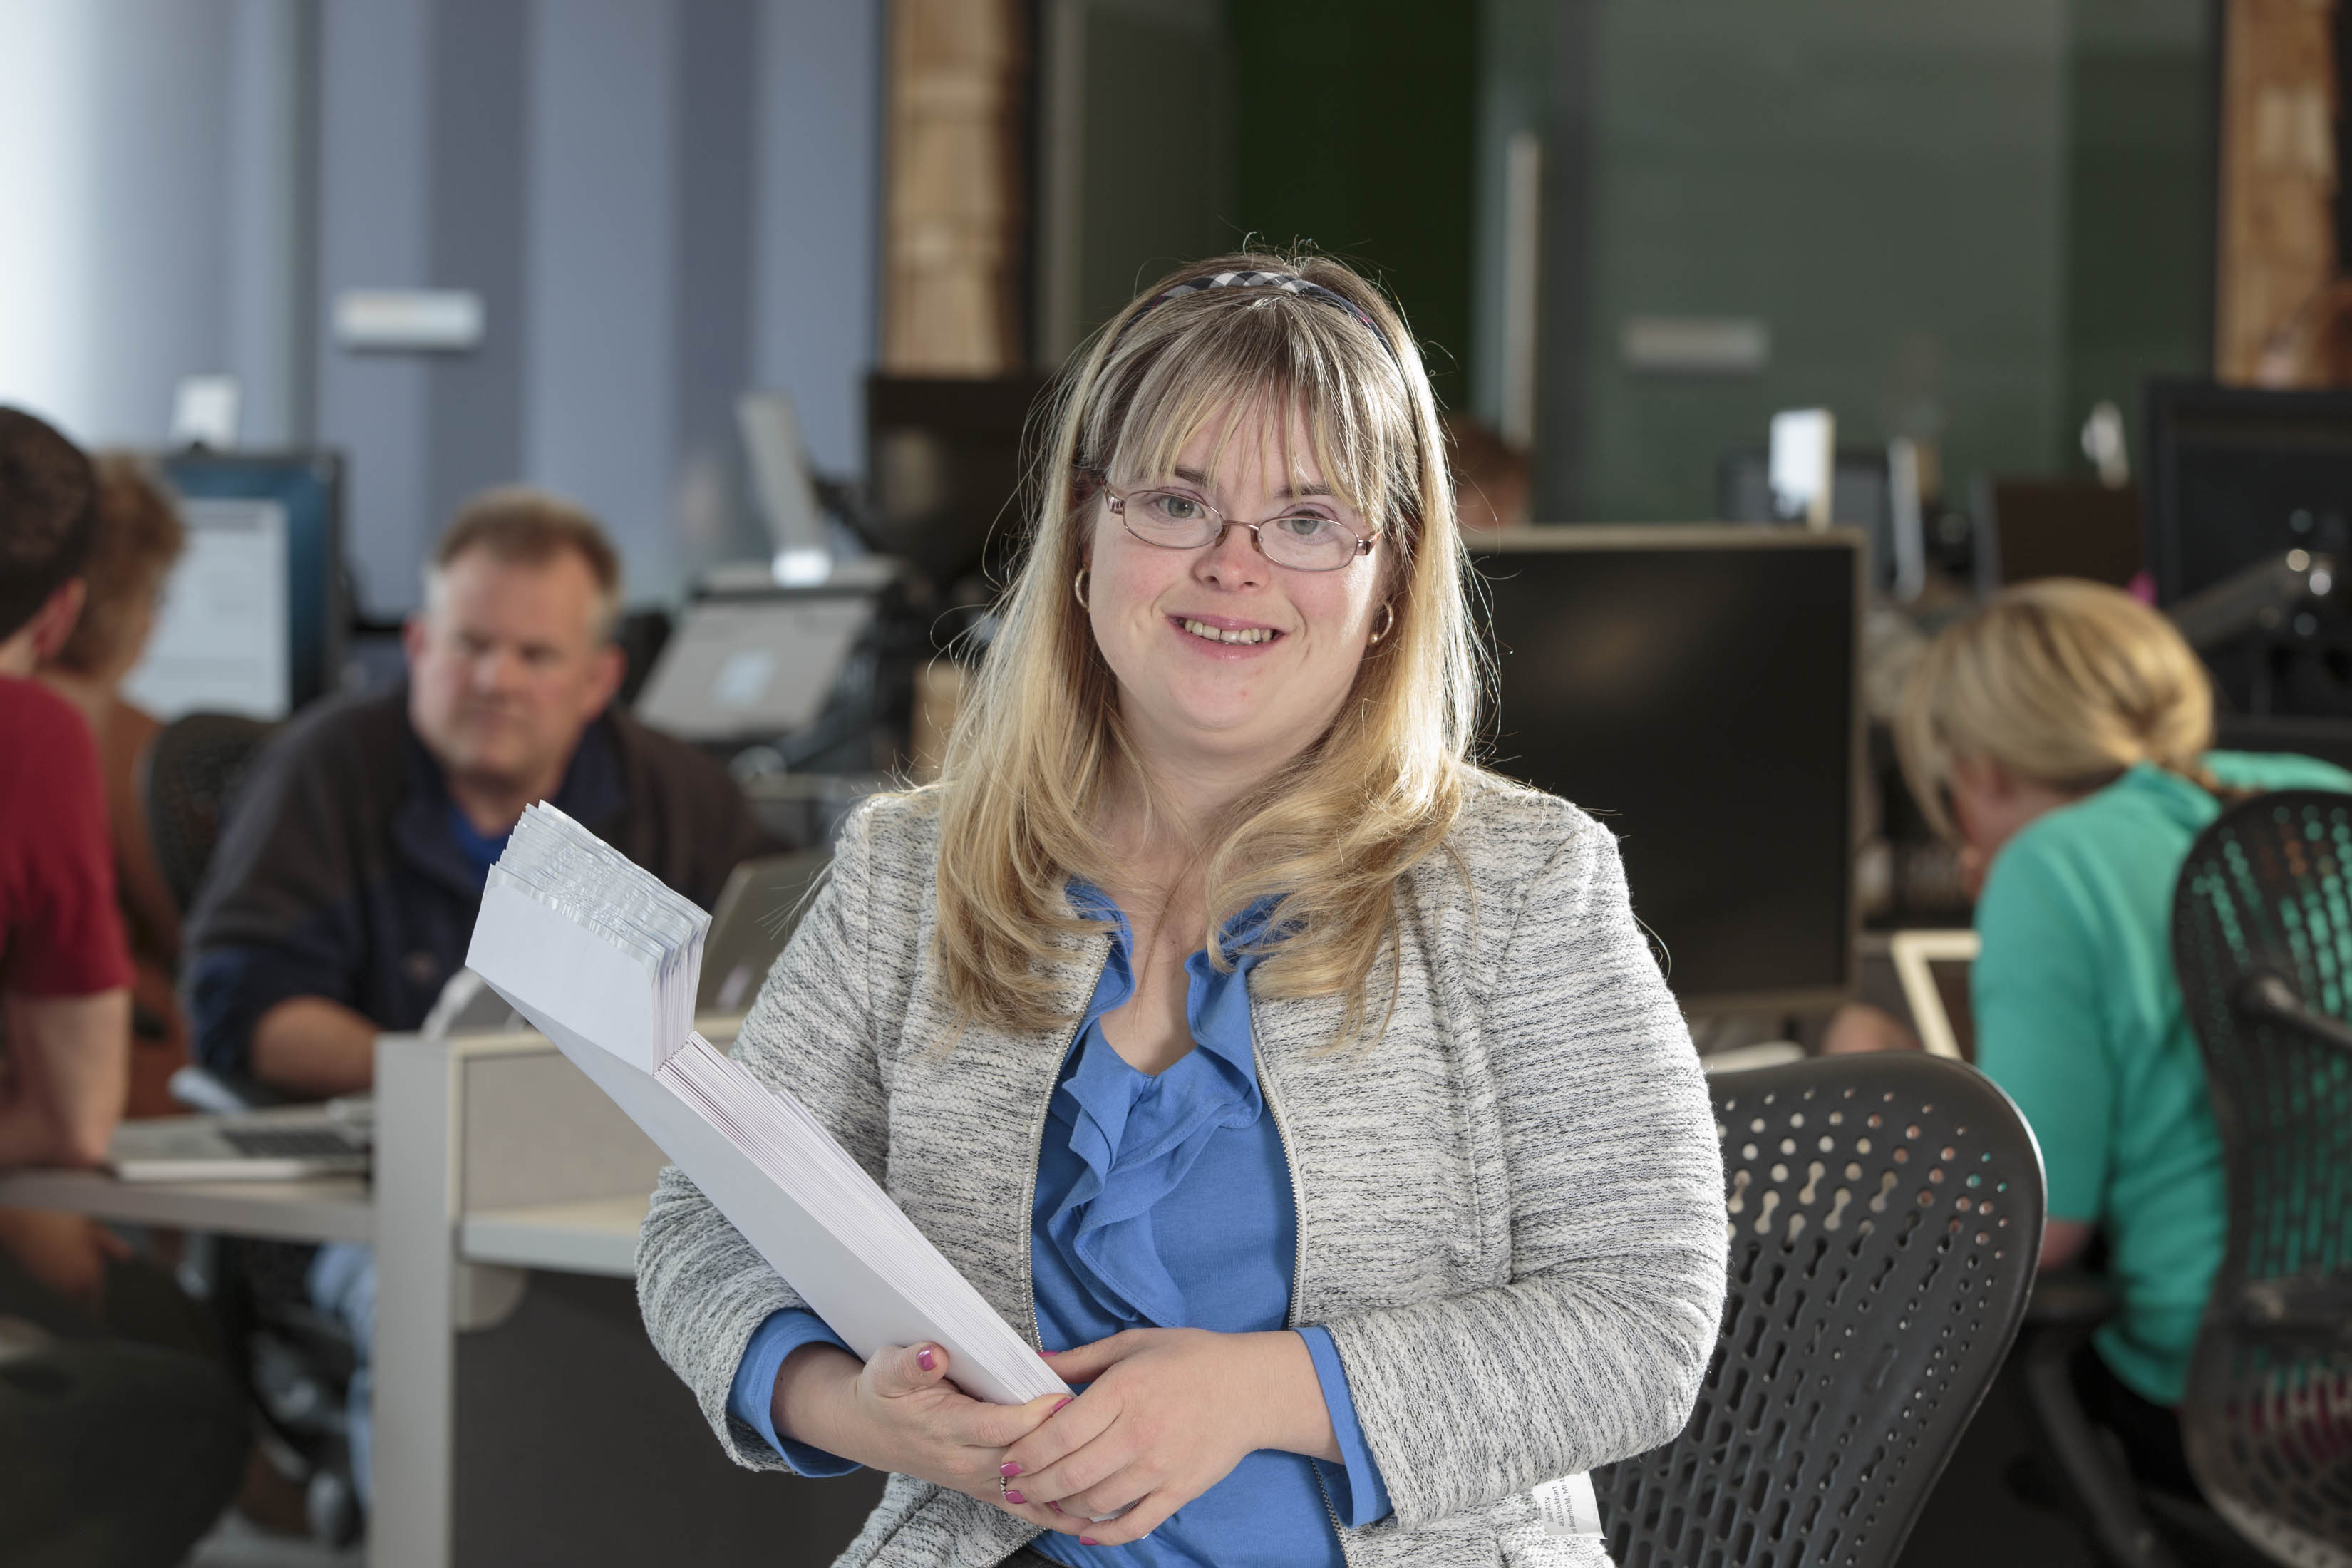 Kate Bartlett, who has Down syndrome, has been working as a benefits assistant at Aquent for 11 years, where she uses technology skills to do her job.